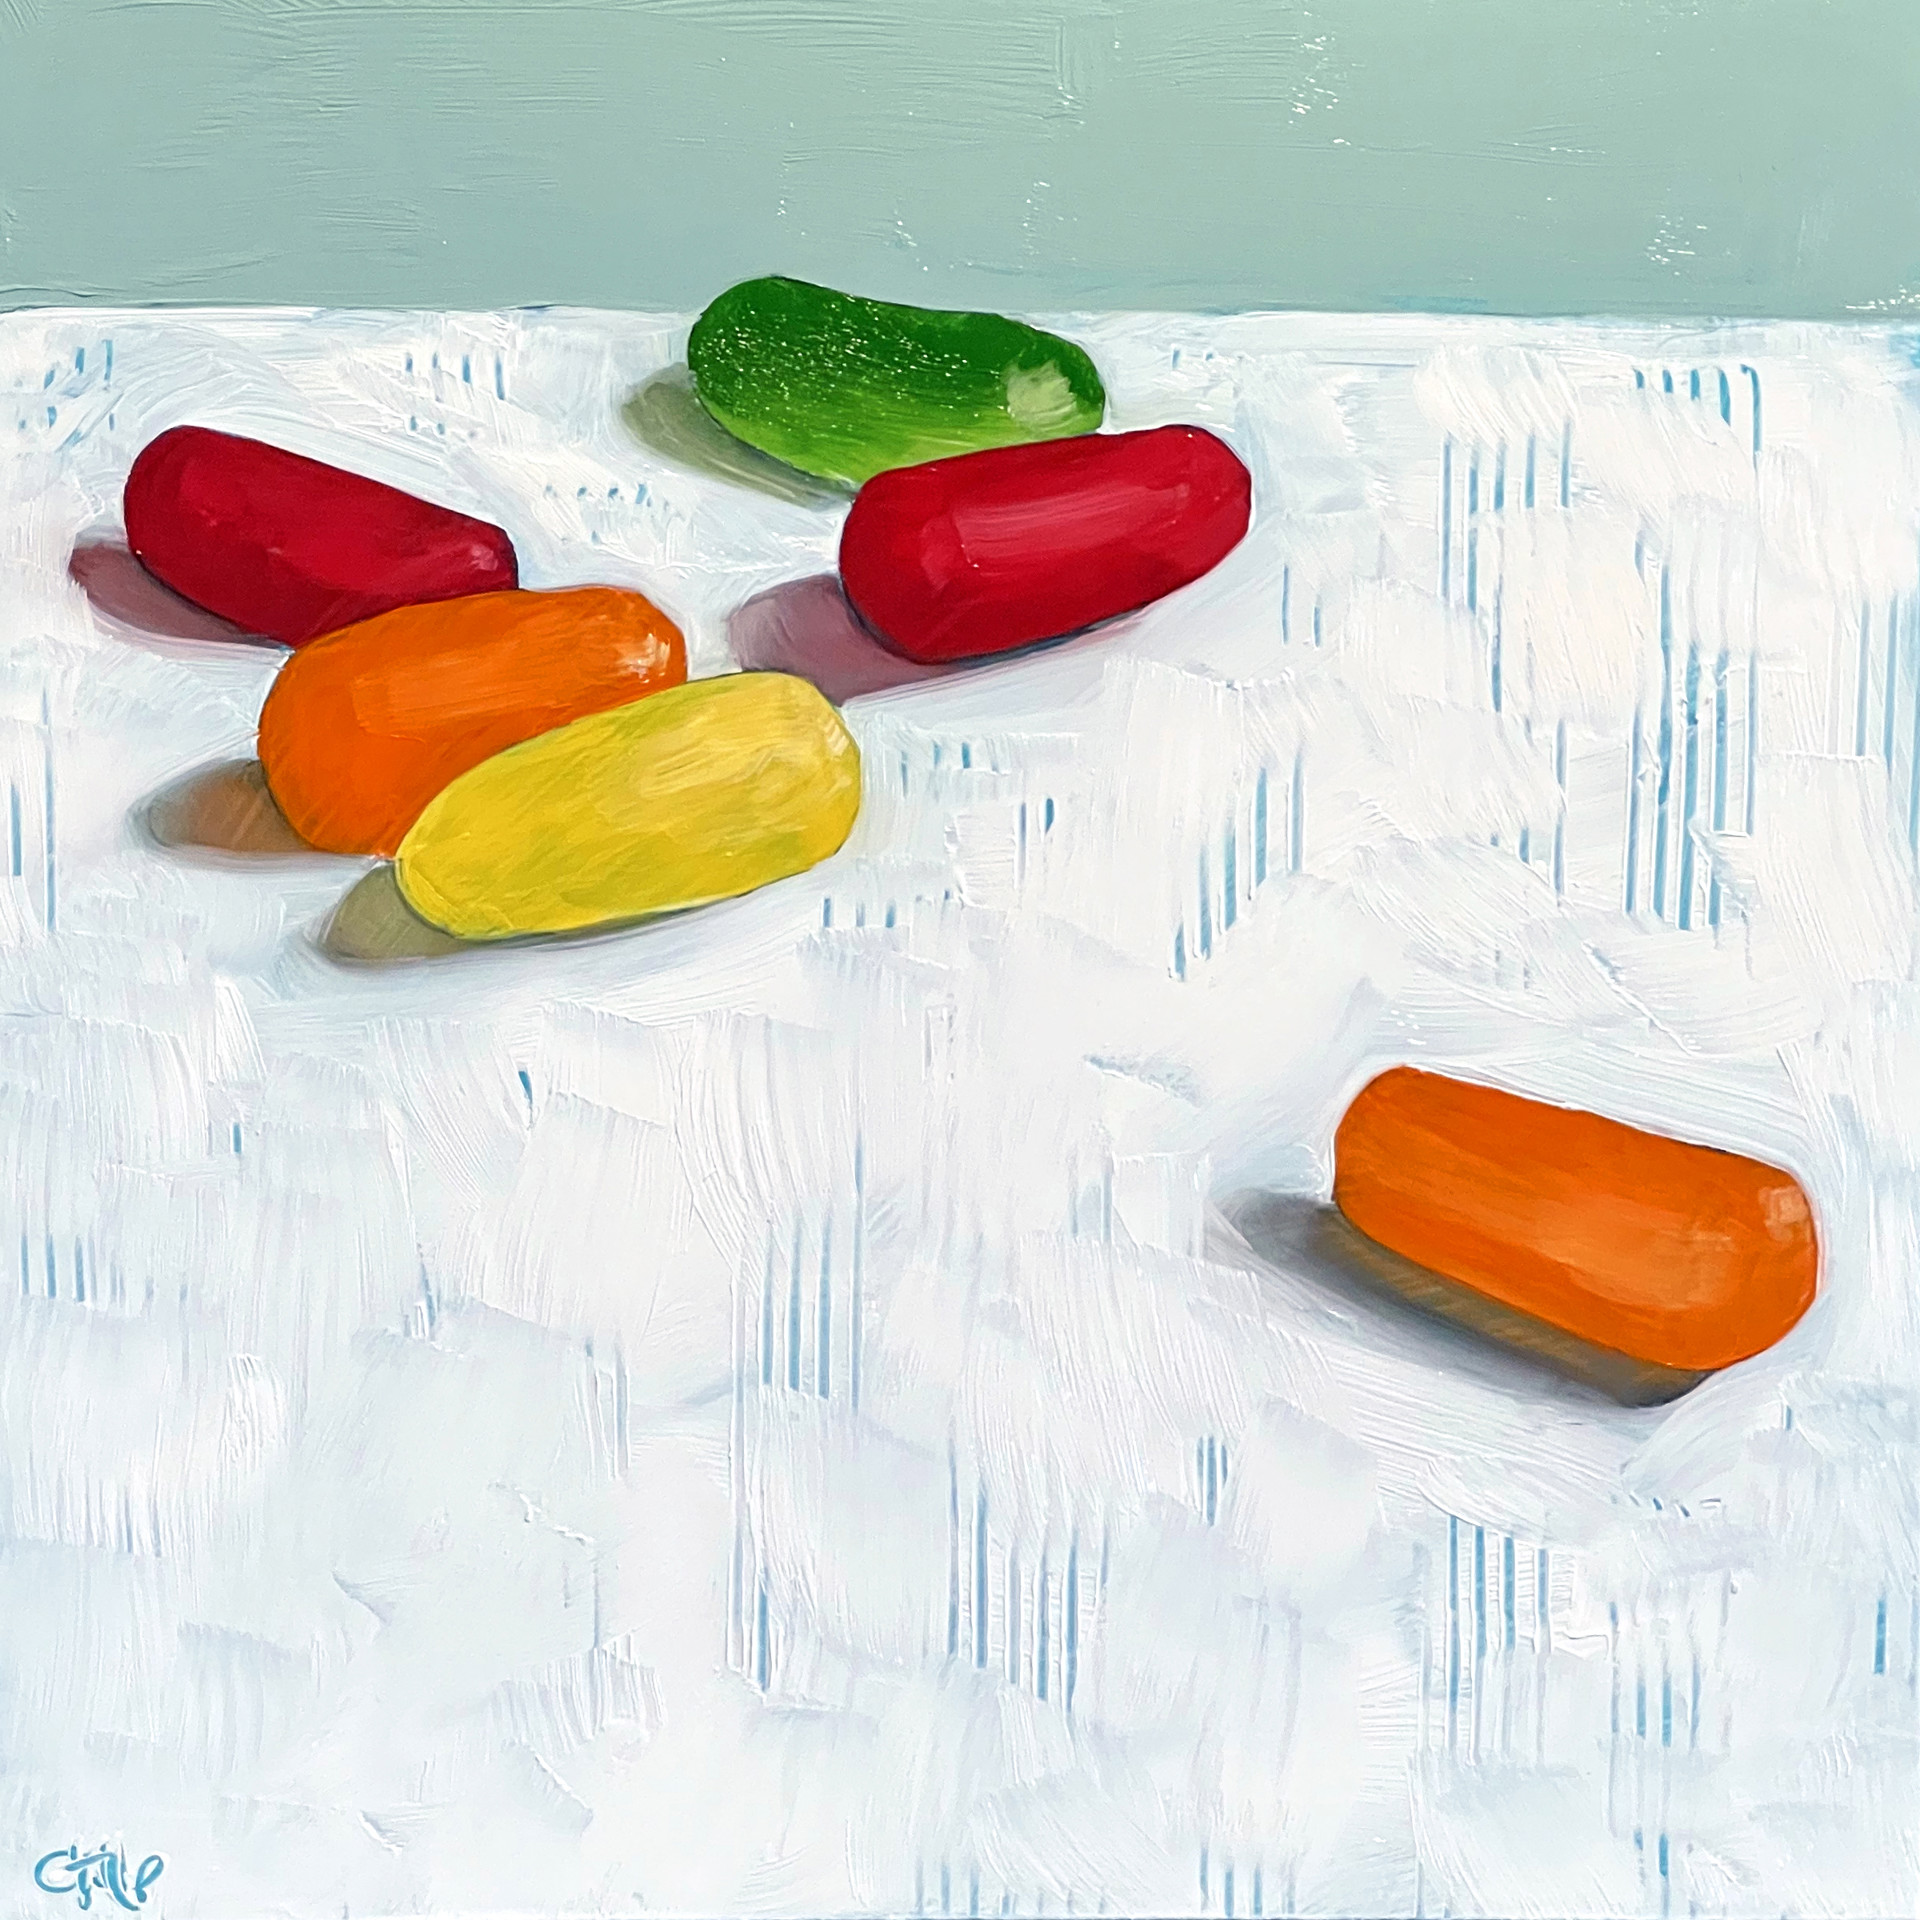 Mike and Ike by Christy Stallop